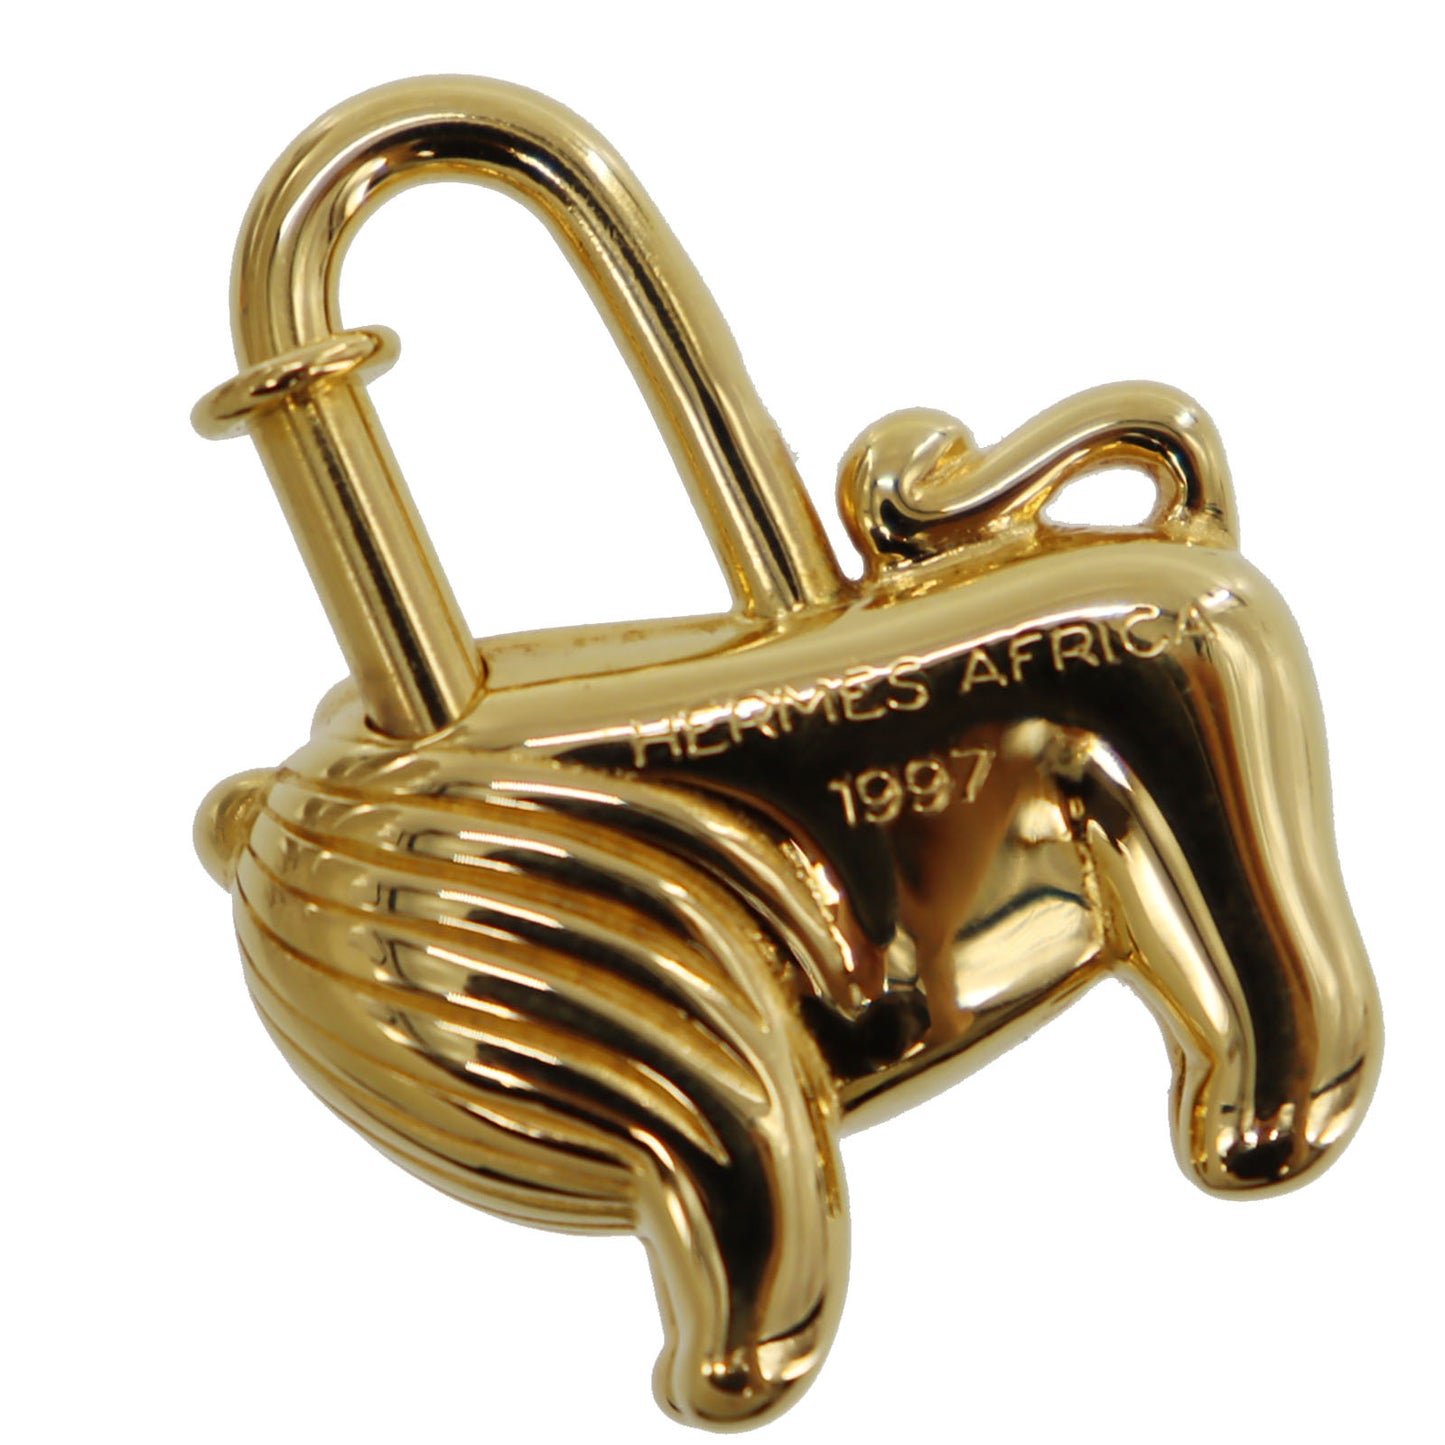 HERMES 1997 Limited Lion Charm Top Cadena Gold Plated #CA247